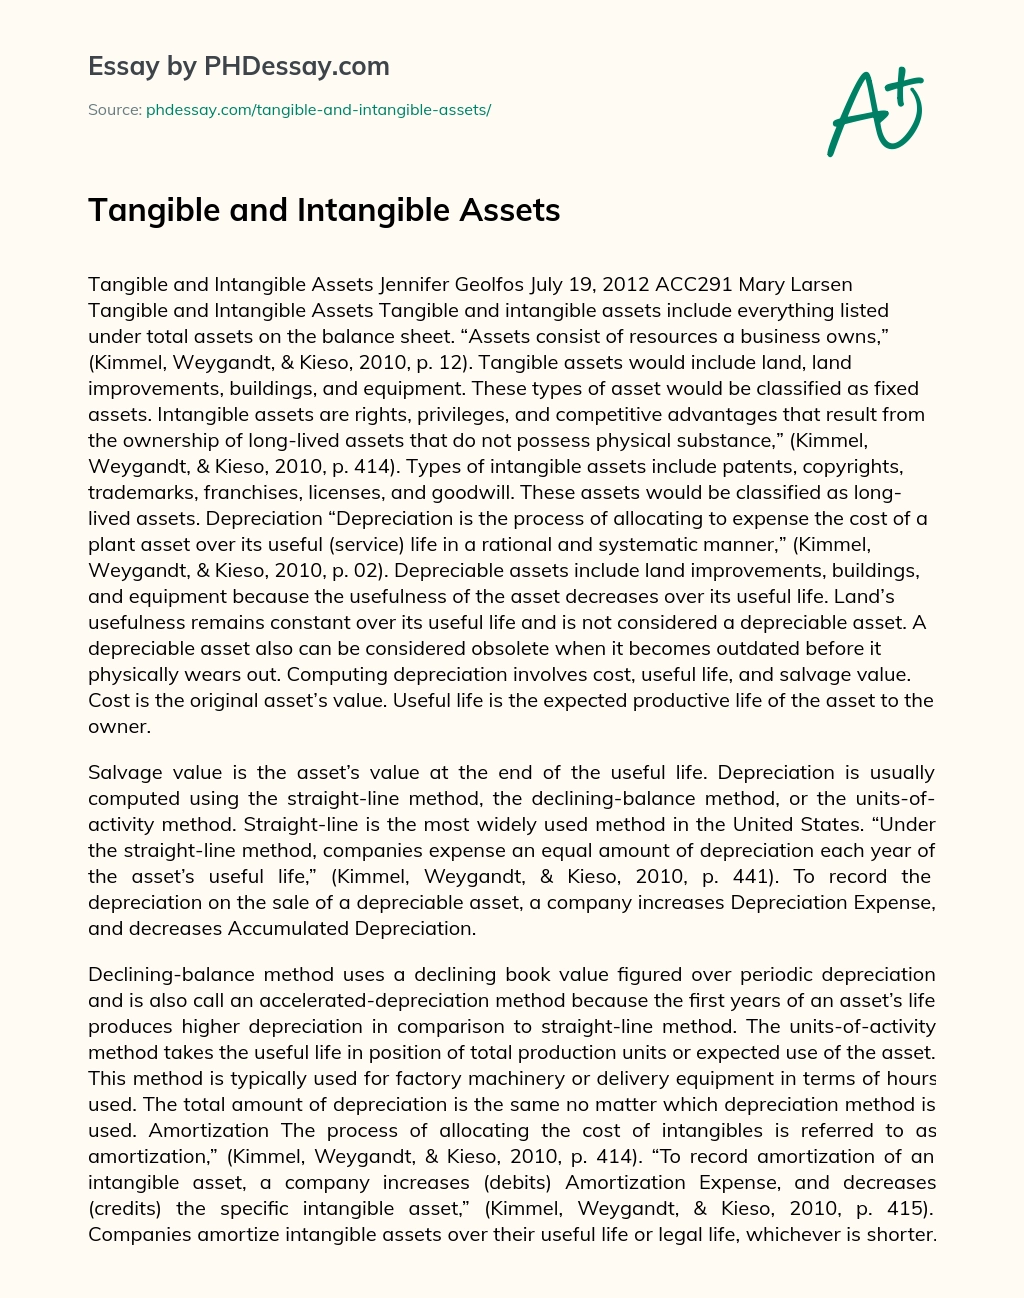 Tangible and Intangible Assets essay